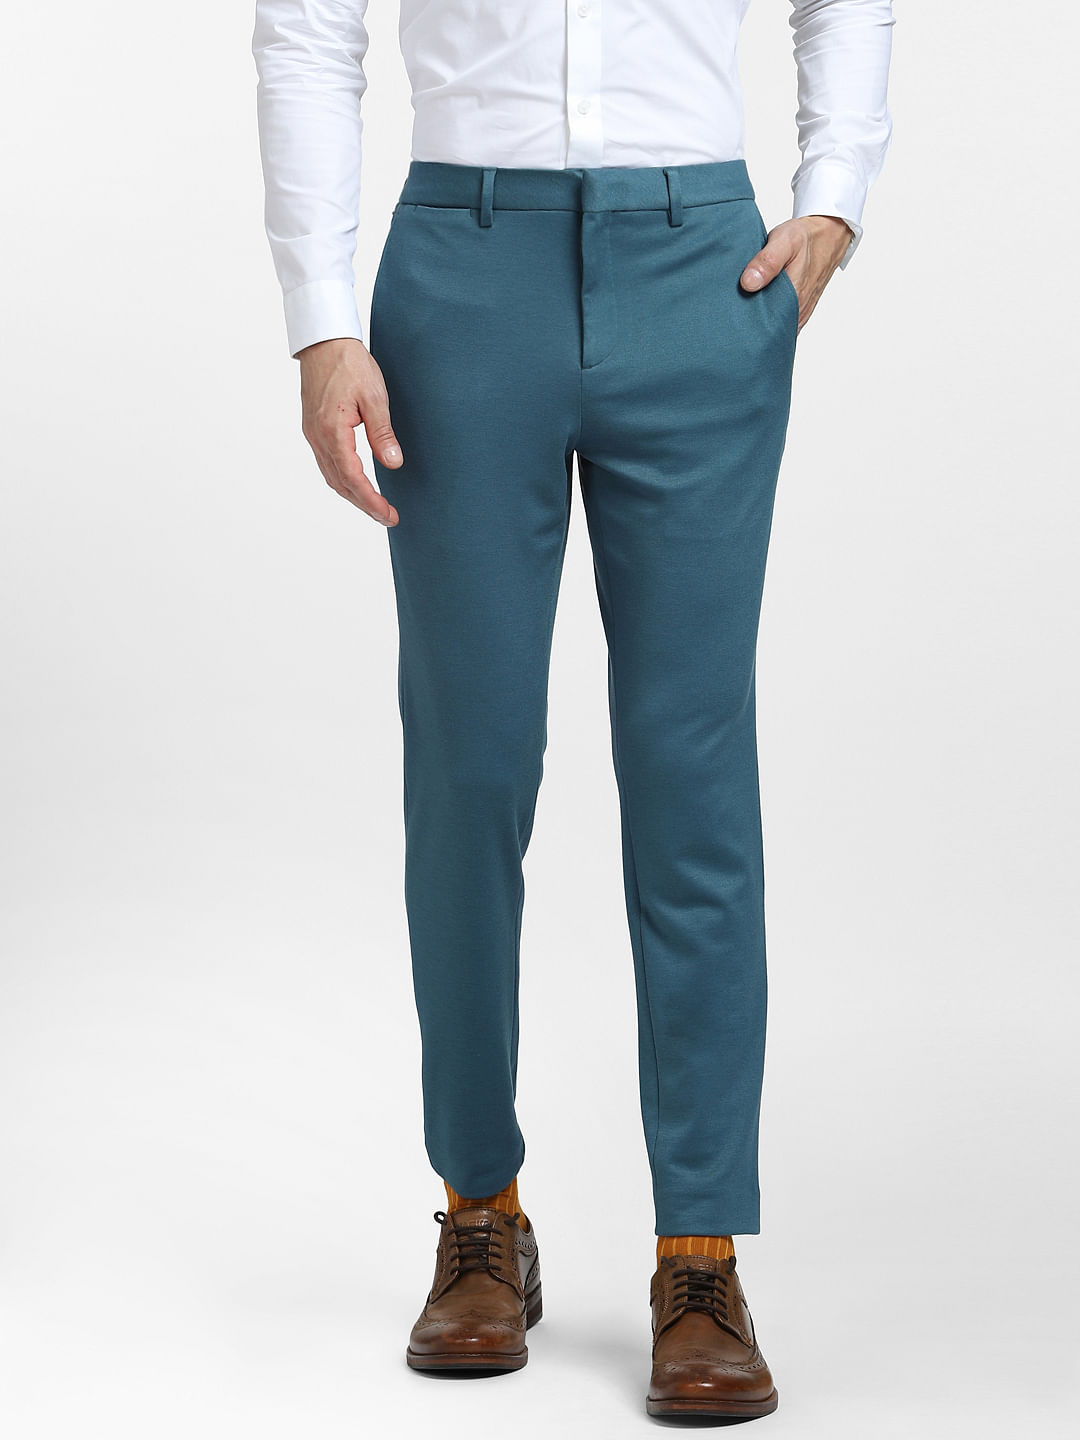 teal pants outfit men  Google Search  Jeans outfit men Mens fashion  sweaters Pants outfit men